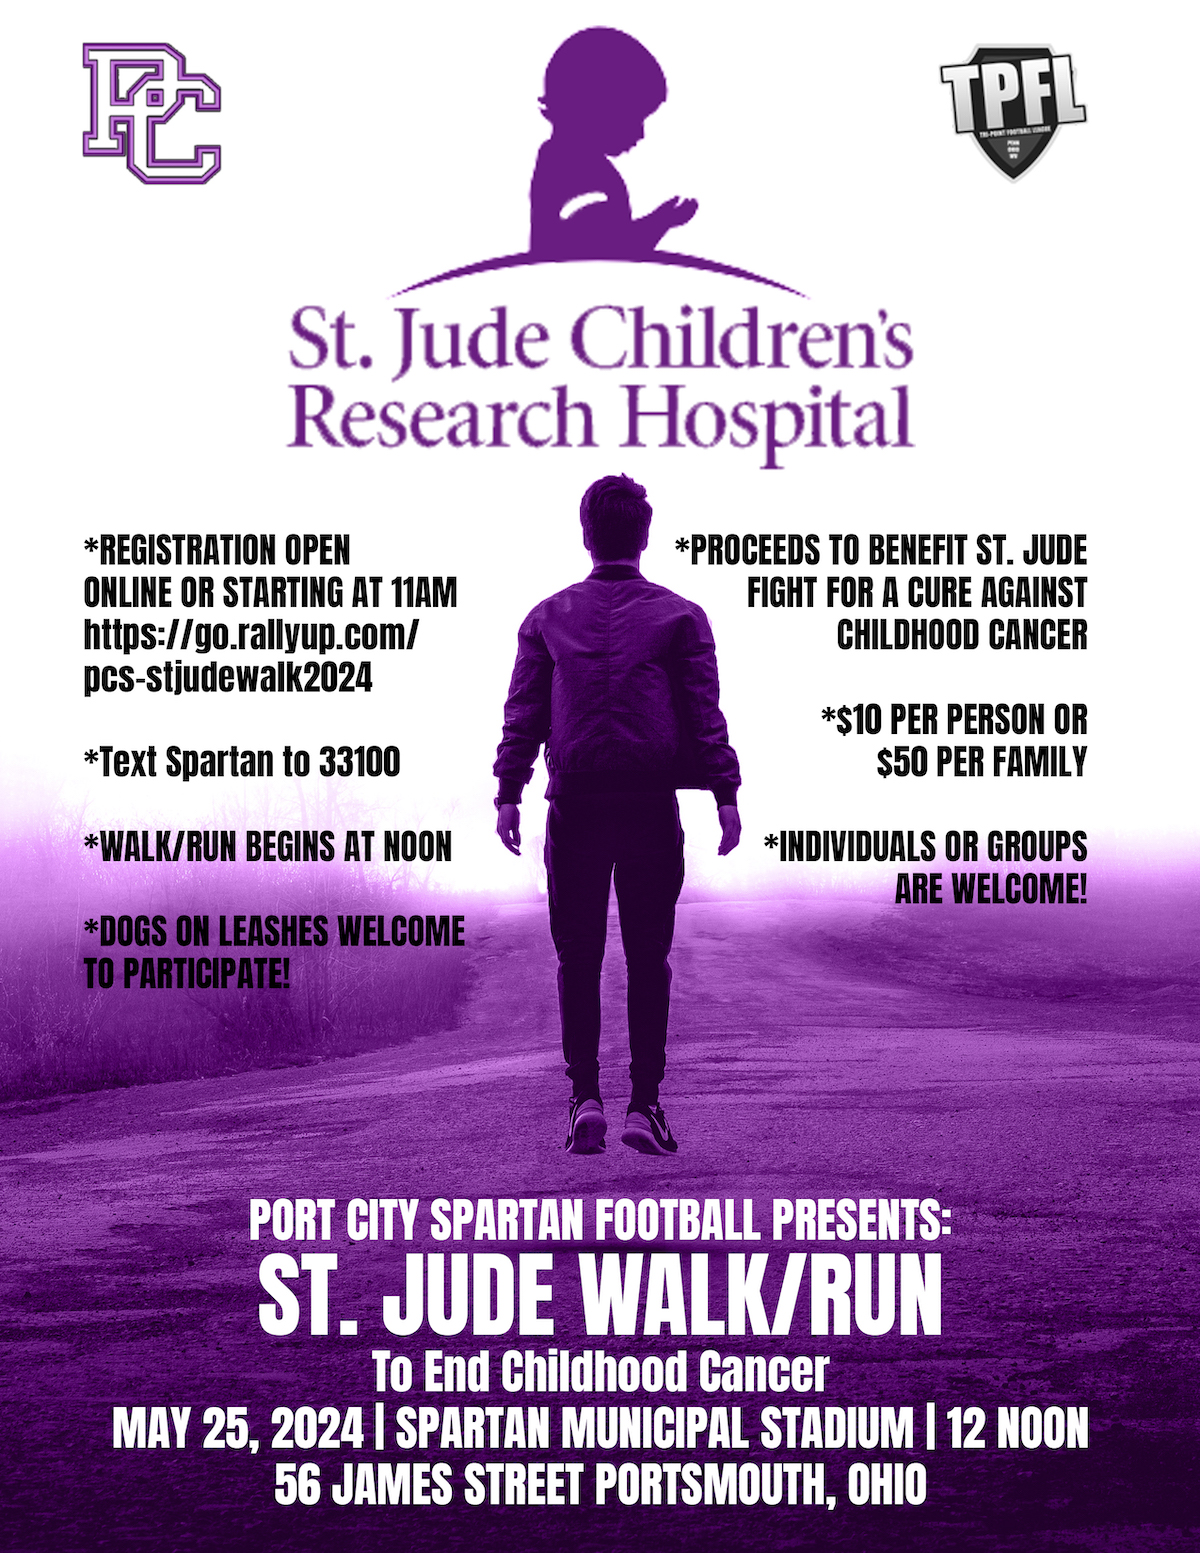 A poster detailing the St. Jude Walk/Run event happening in Portsmouth in May.